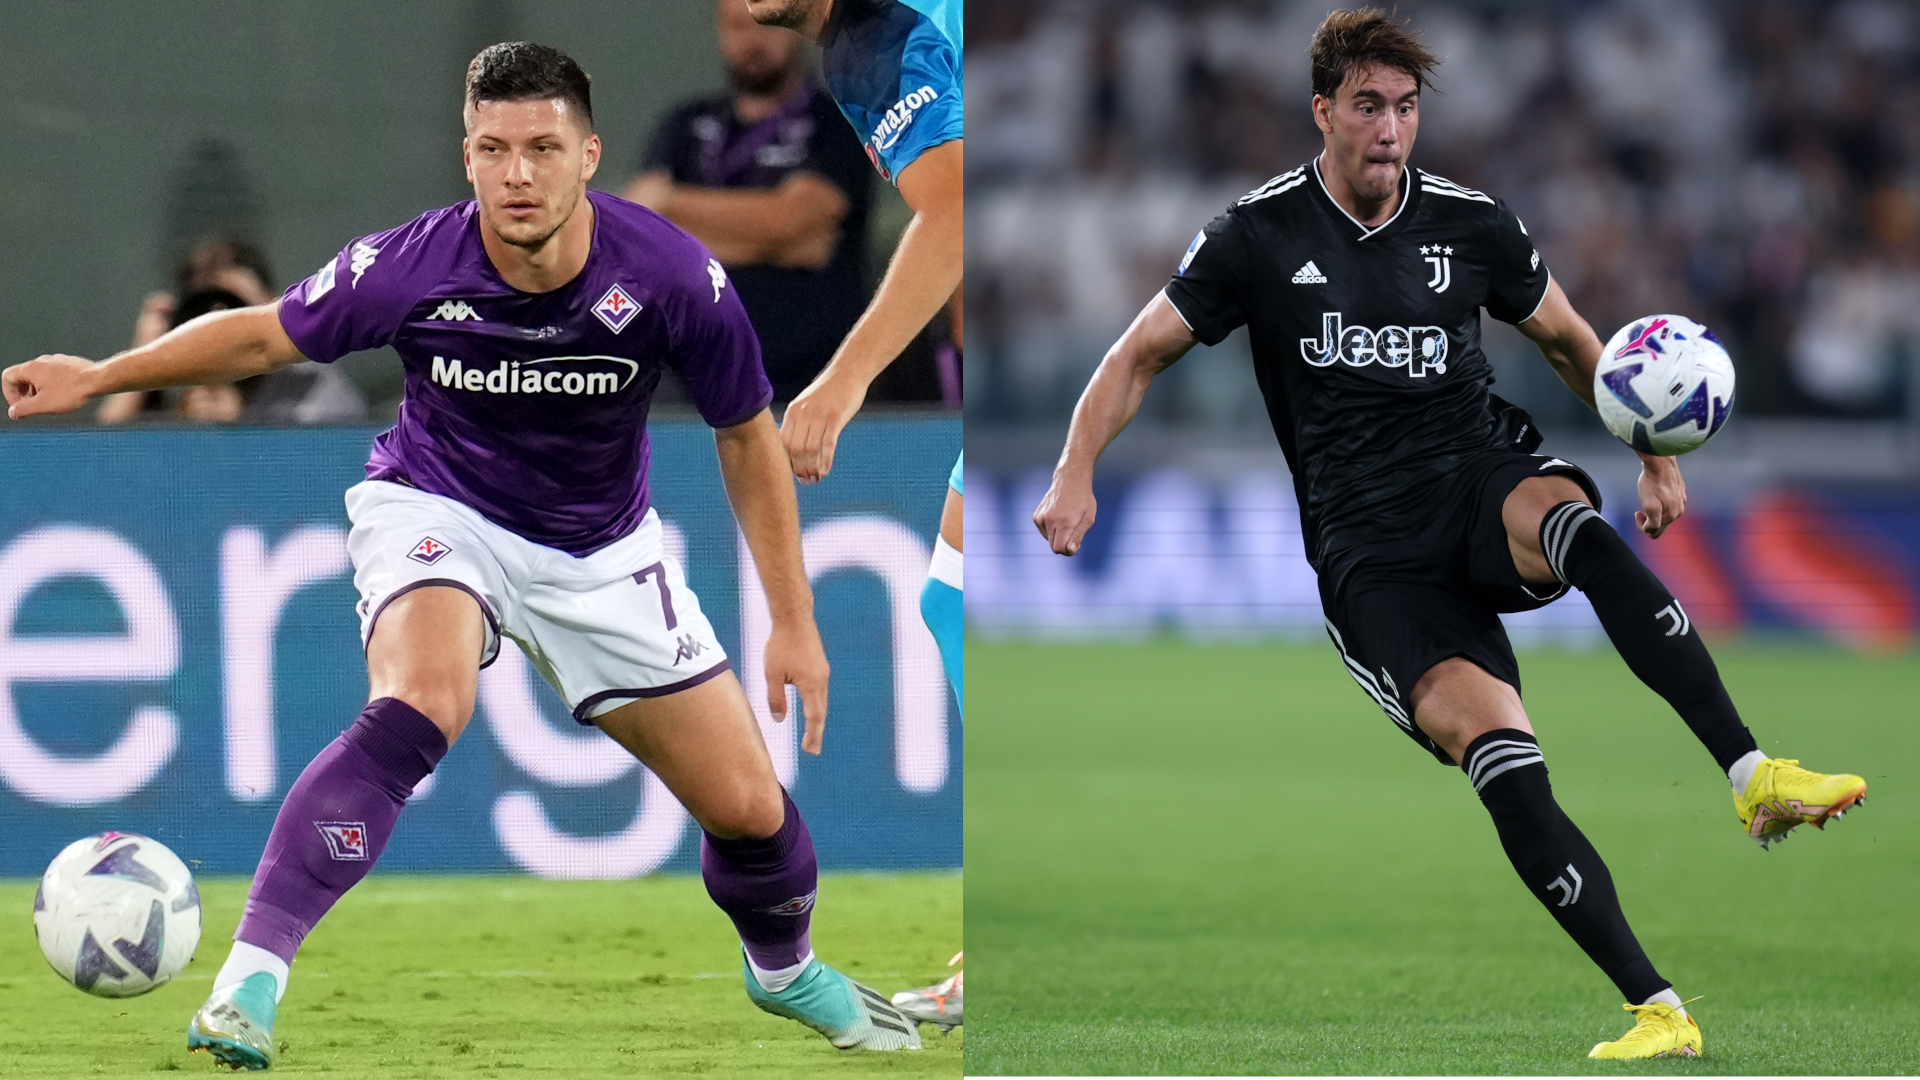 Fiorentina vs Juventus: Lineups and how to watch - Viola Nation